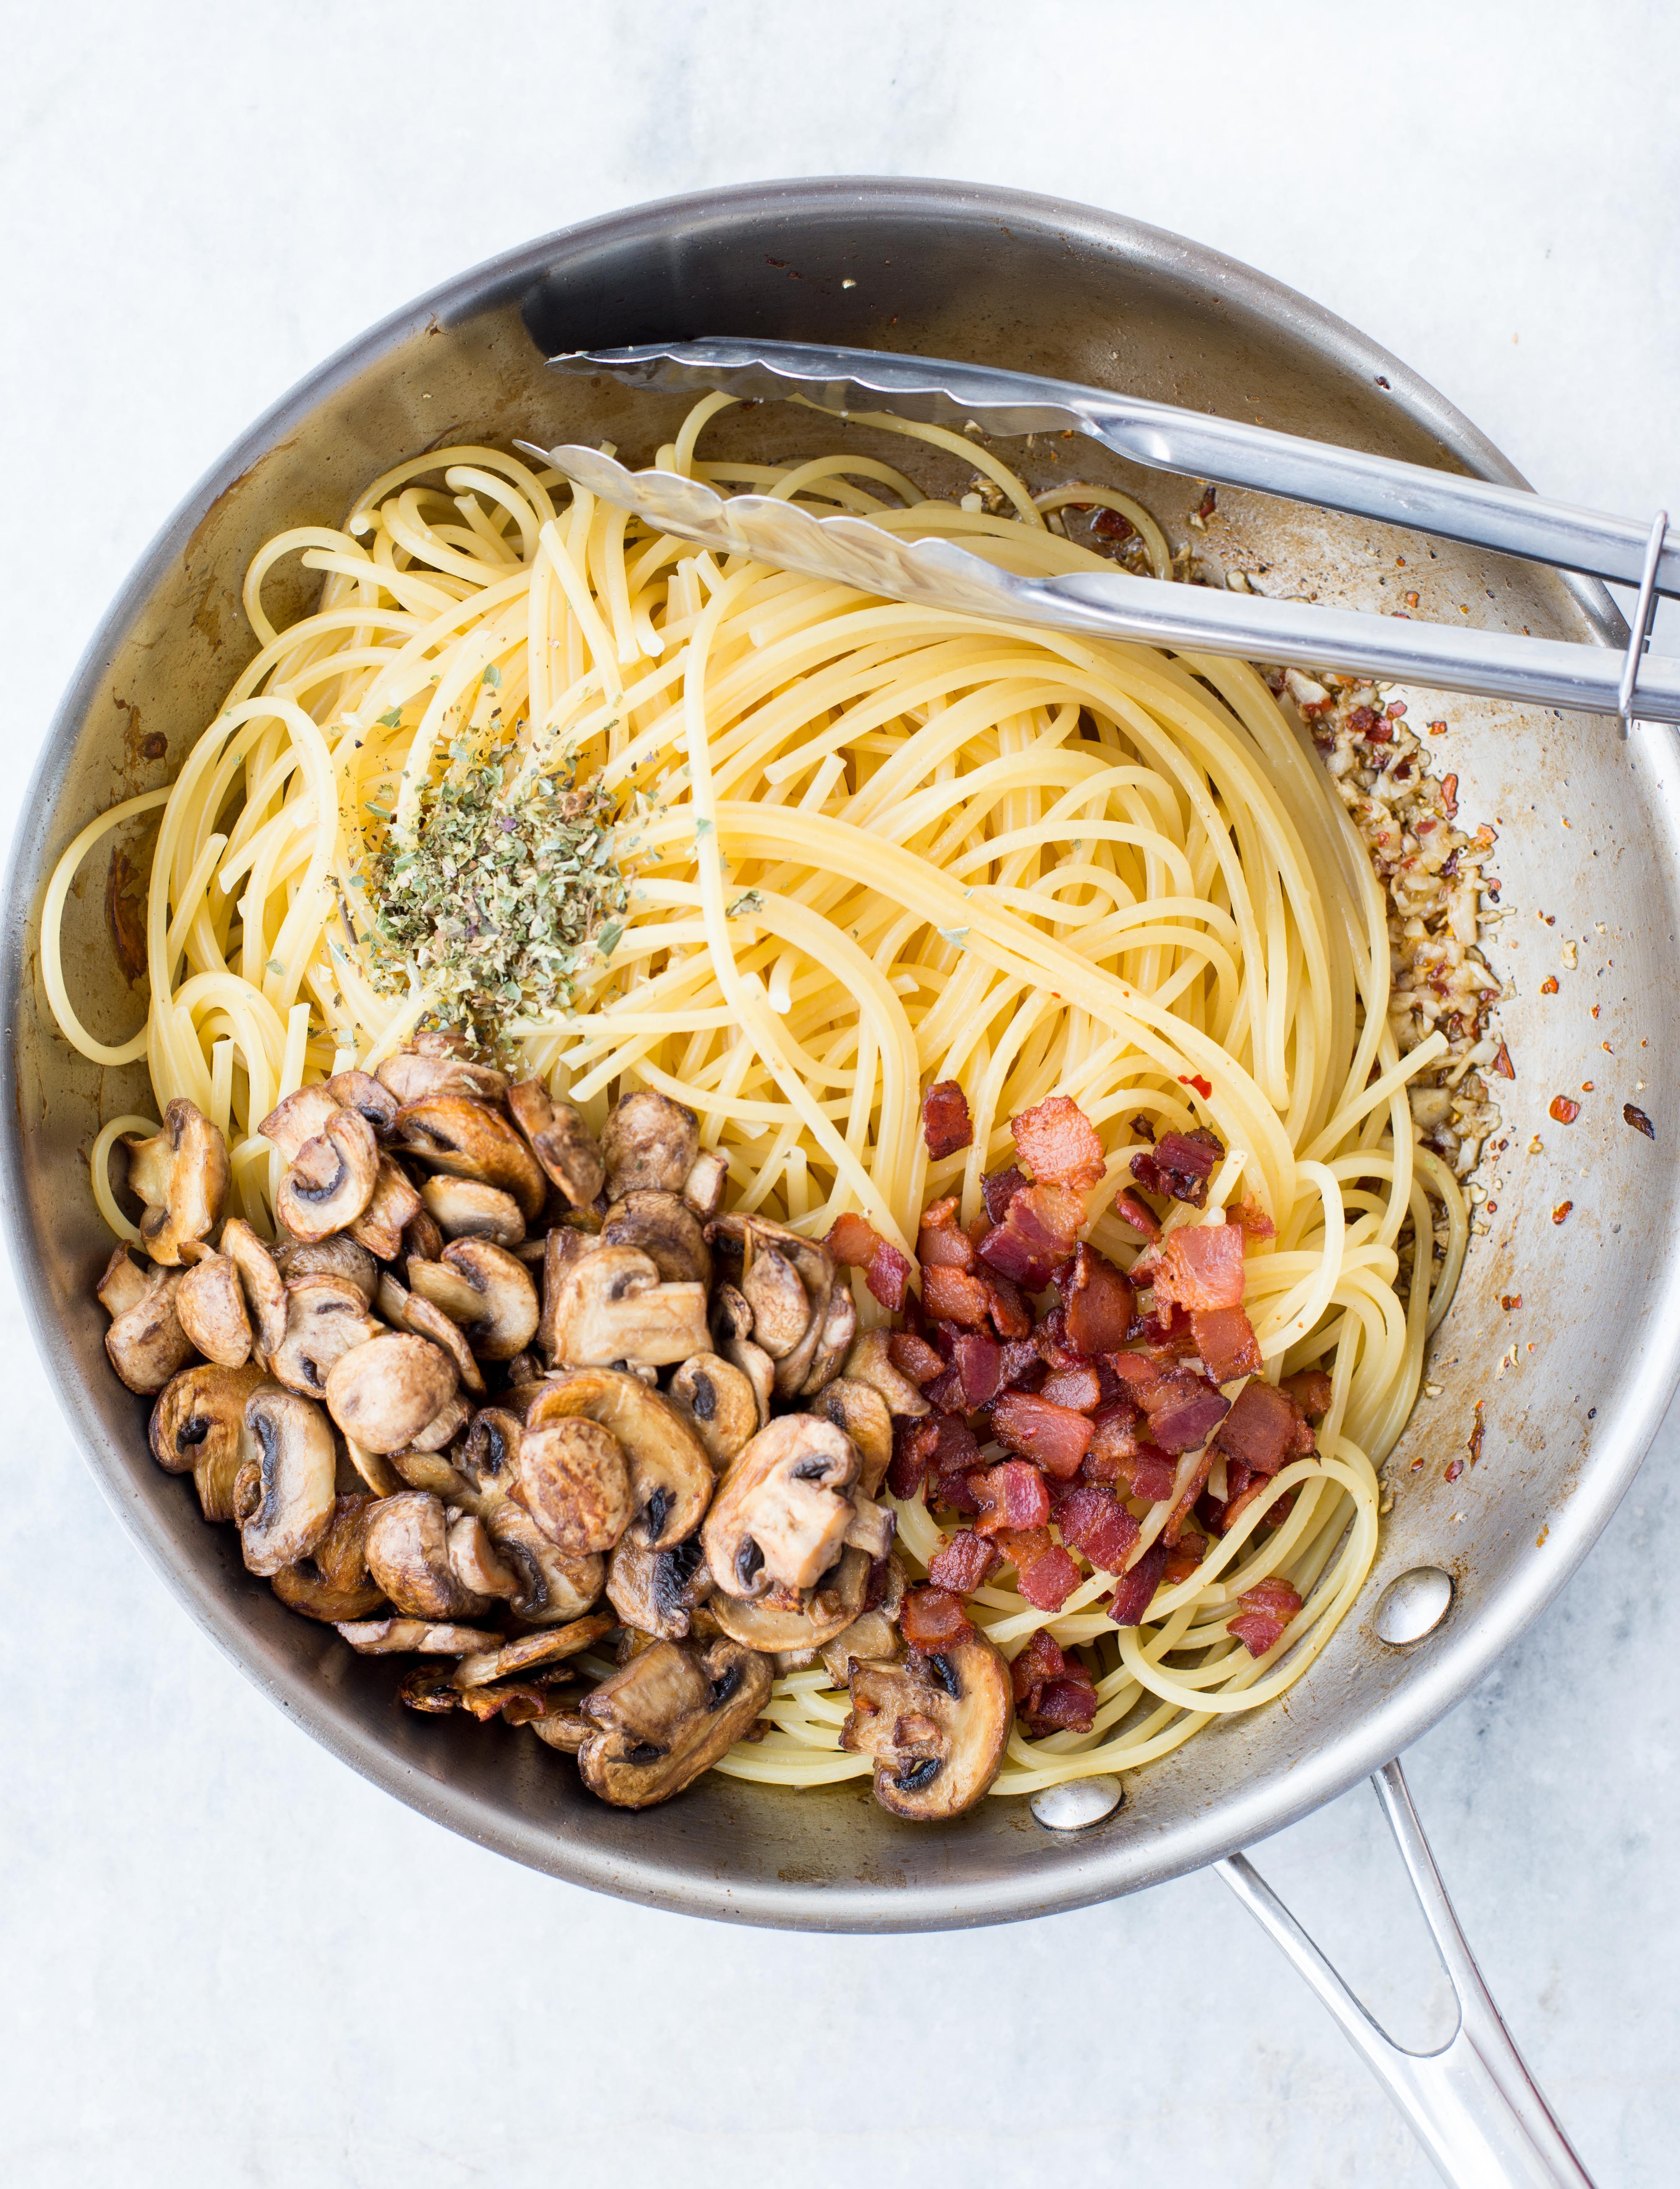 Garlic Mushroom Spaghetti With Bacon is an easy weeknight dinner, made with just handful of ingredients. This Mushroom Pasta is packed with flavor and takes just 20 minutes from start to end.